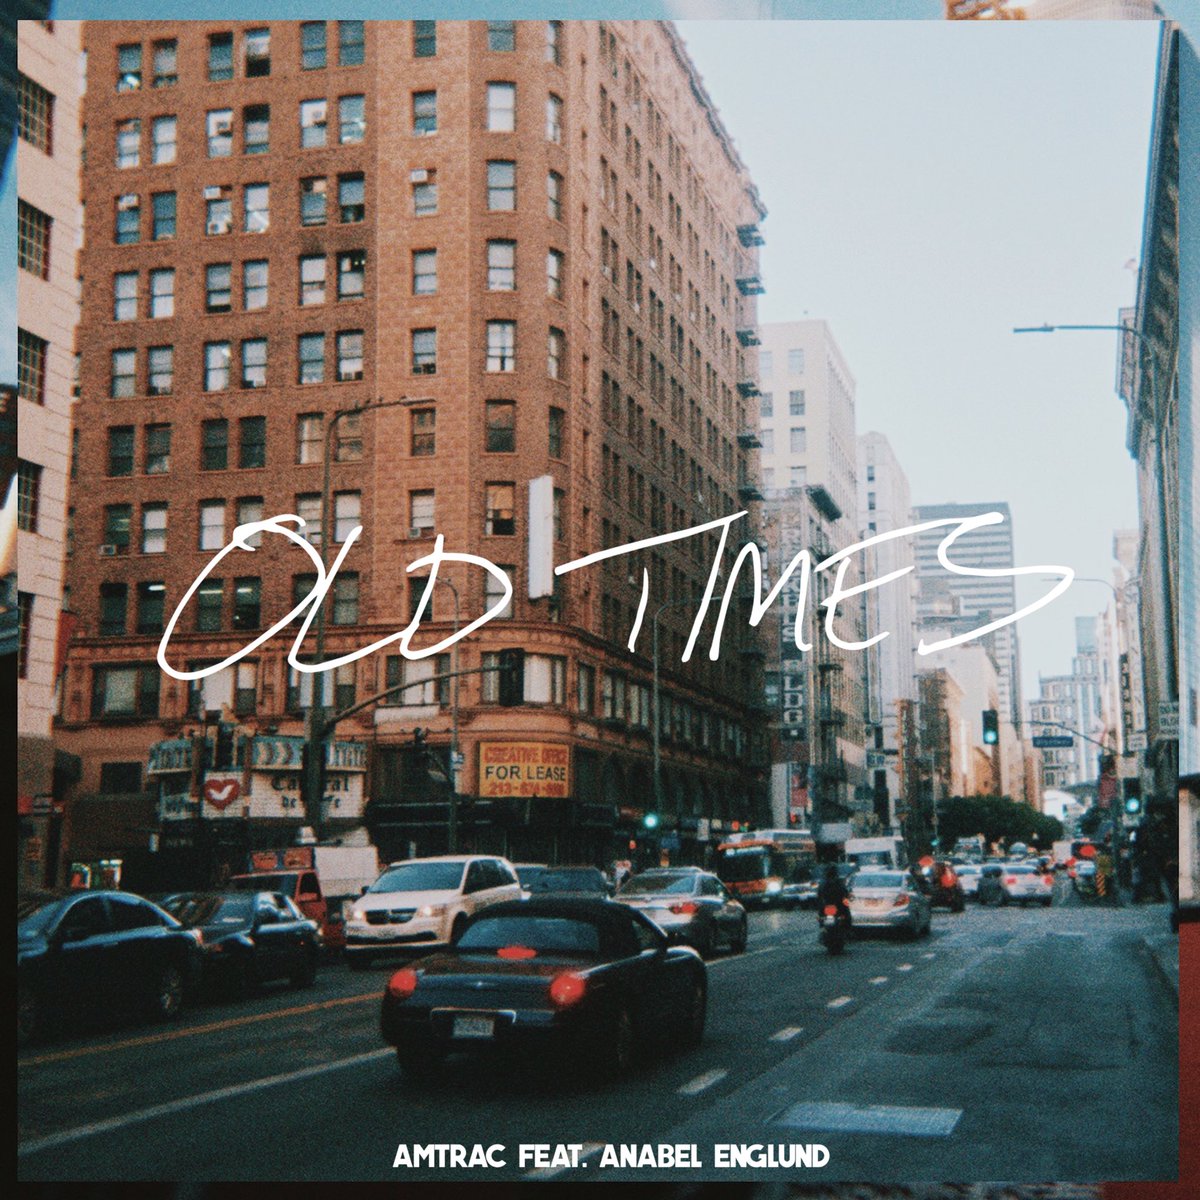 Amtrac Drops Nostalgic House Single “Old Times” ft. Anabel Englund